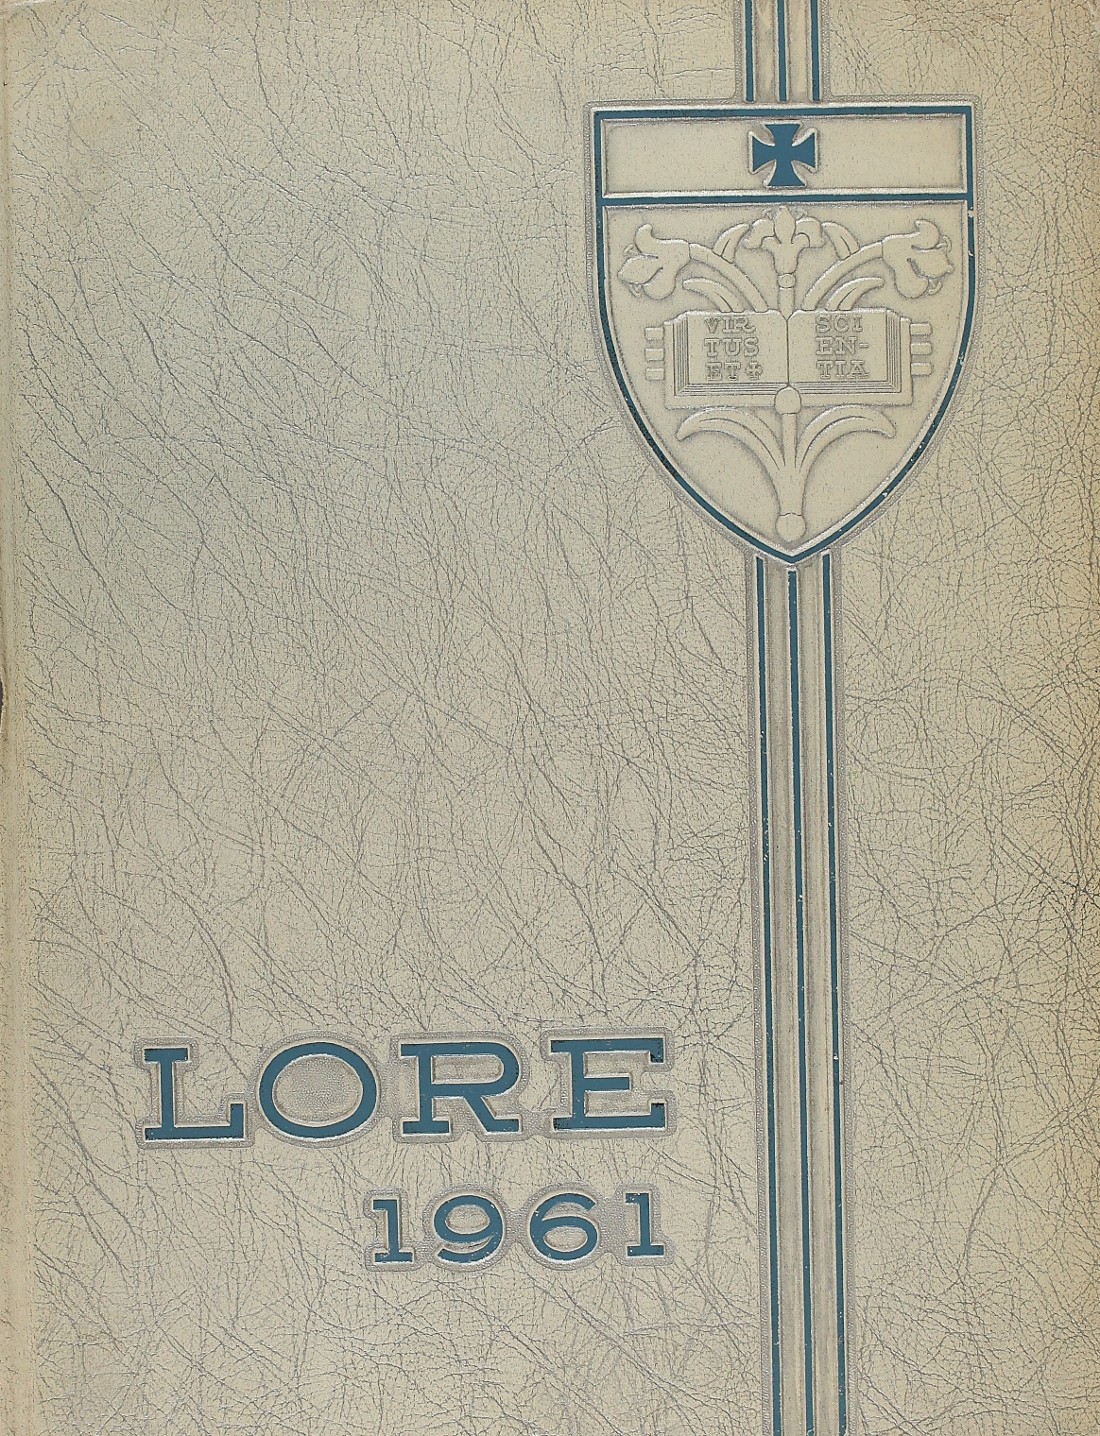 1961 yearbook from Our Lady of Mercy High School from Detroit, Michigan